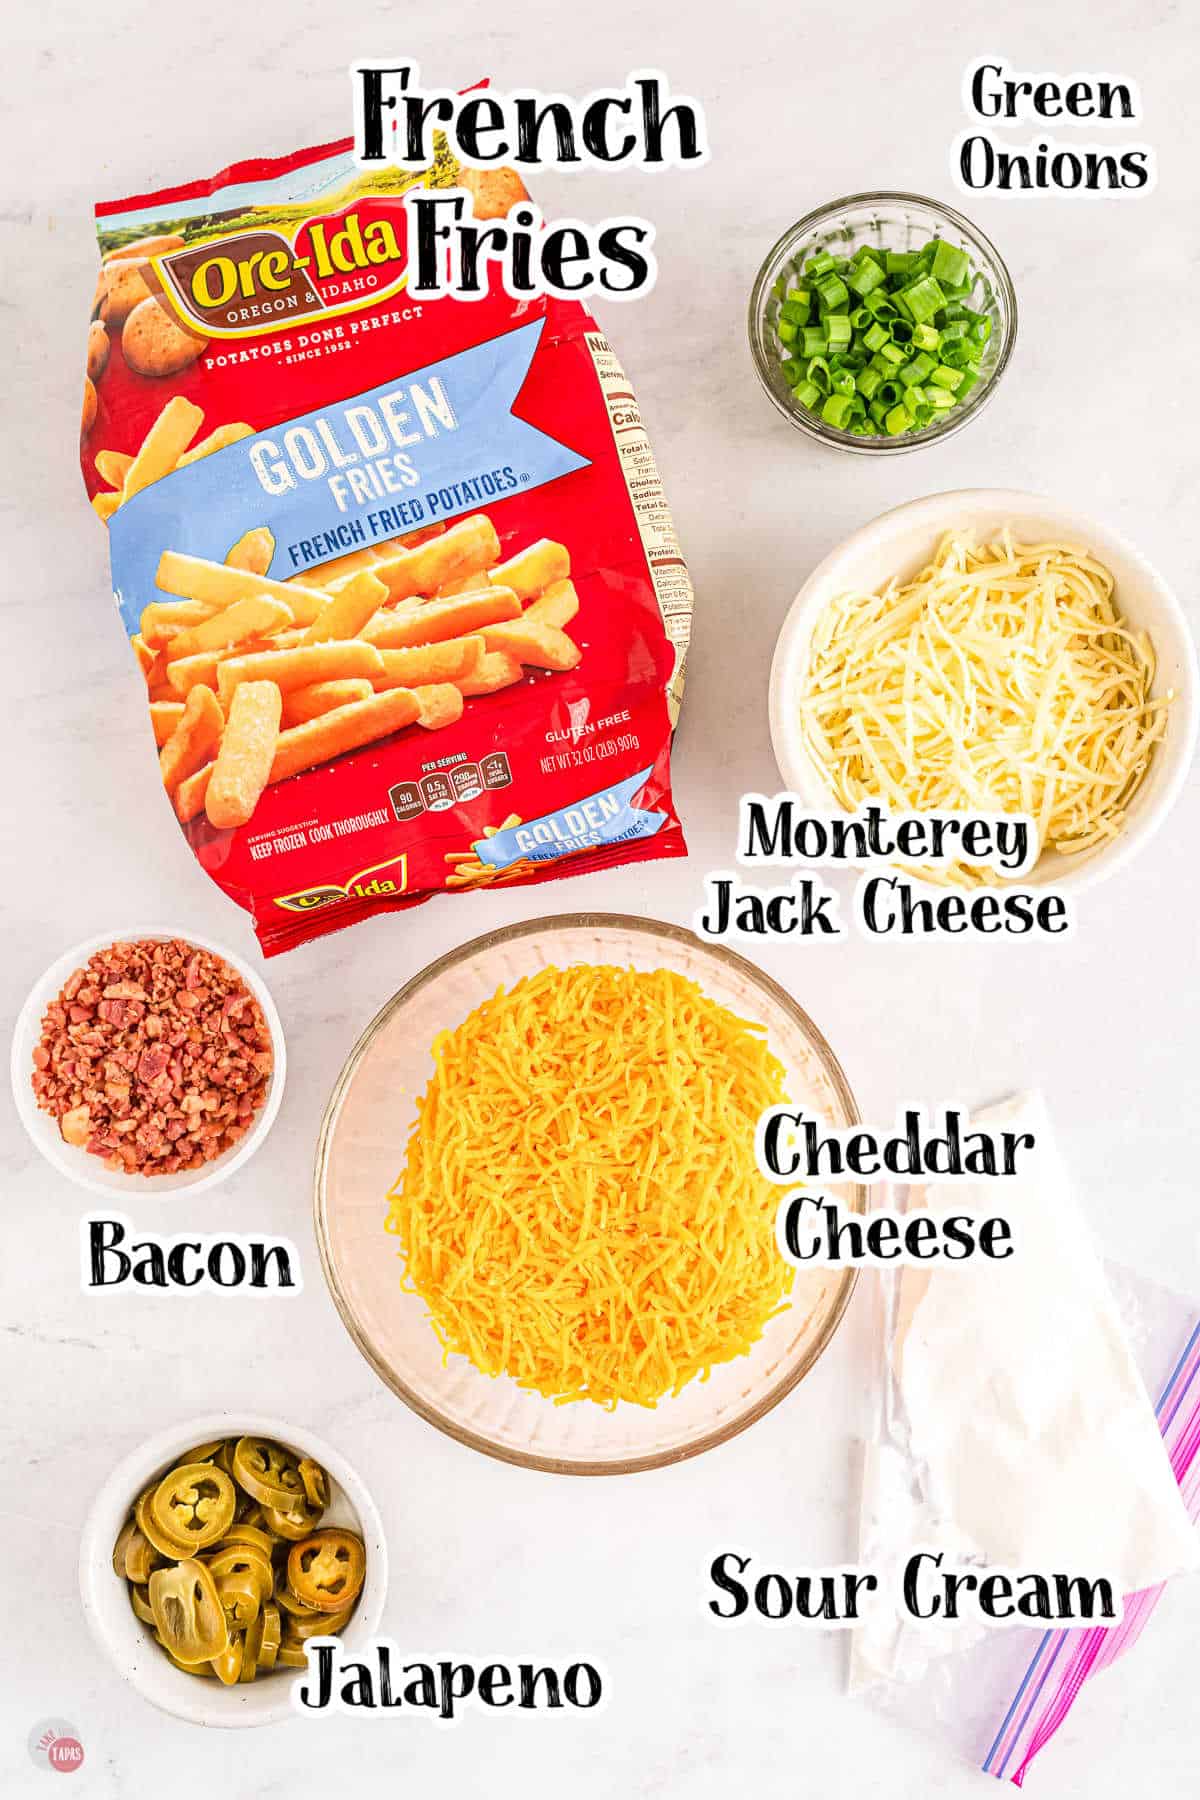 Top view of ingredients for loaded fries including a bag of frozen fries, and then bowls in various sizes filled with green onions, Monterey Jack cheese, bacon crumbles, jalapeños and at the bottom of the picture there is a freezer bag with sour cream in it.